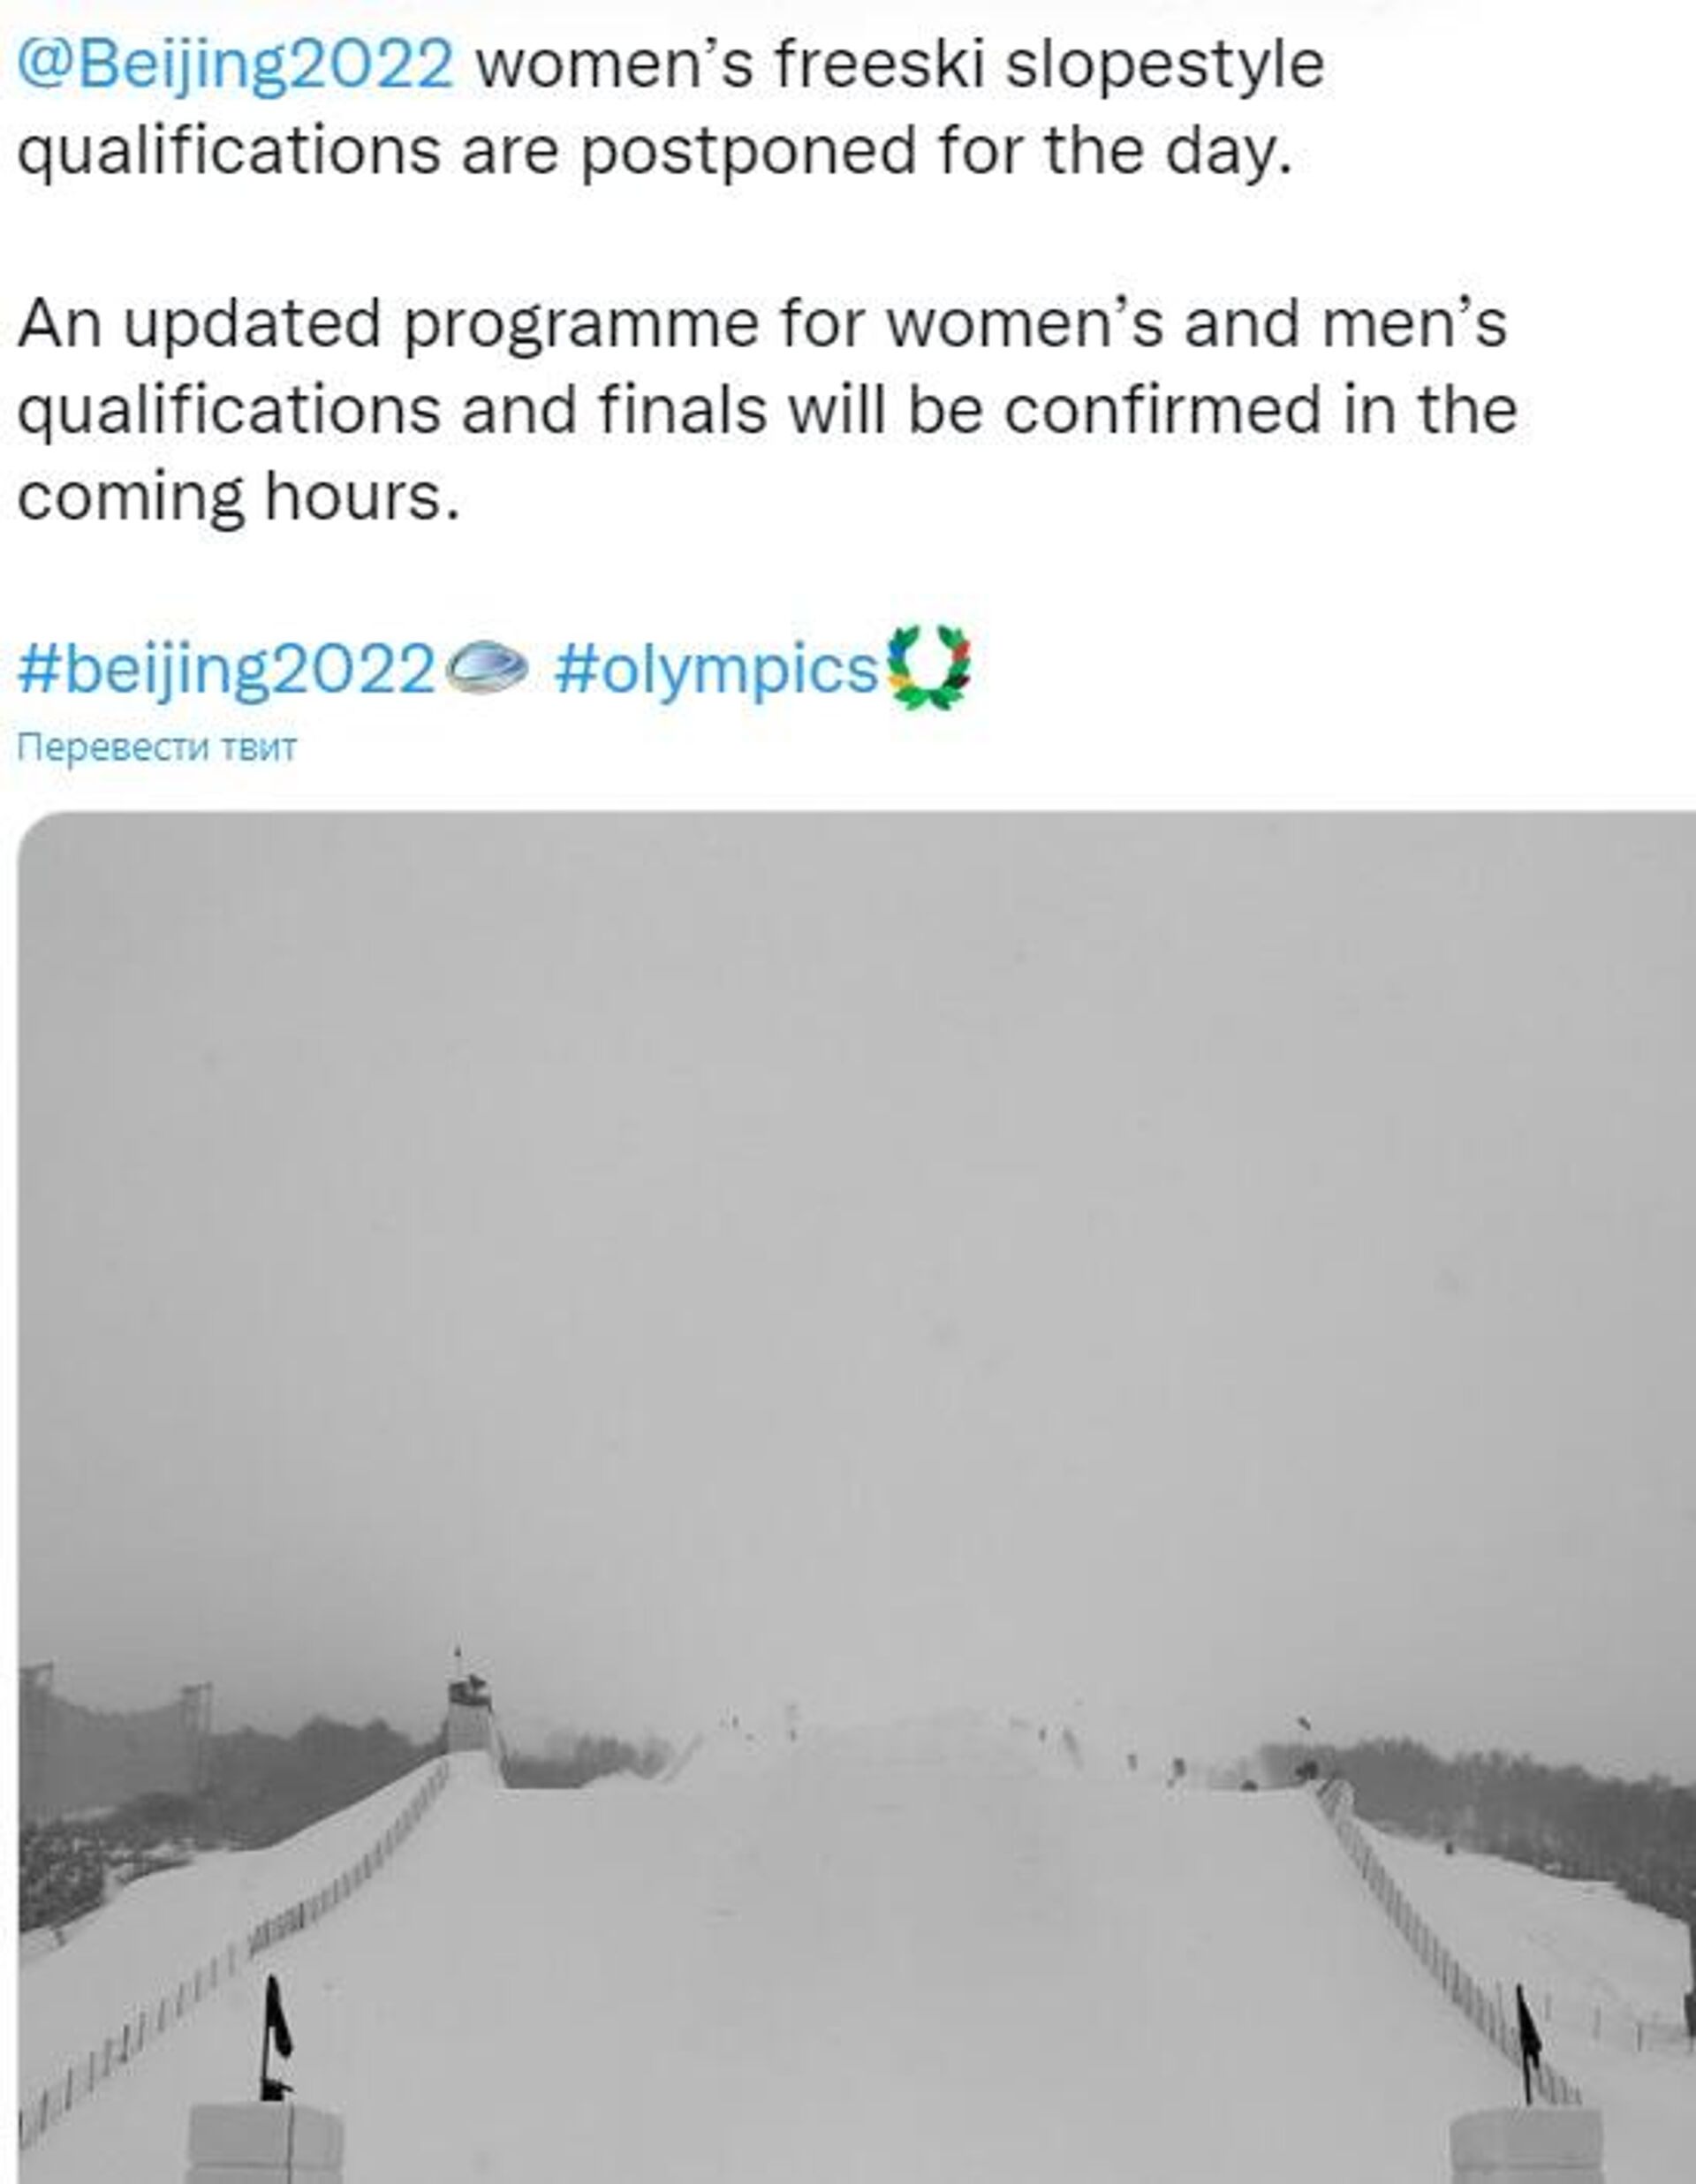 Real snow at the Winter Olympics in Beijing, February 2022 - Sputnik International, 1920, 13.02.2022